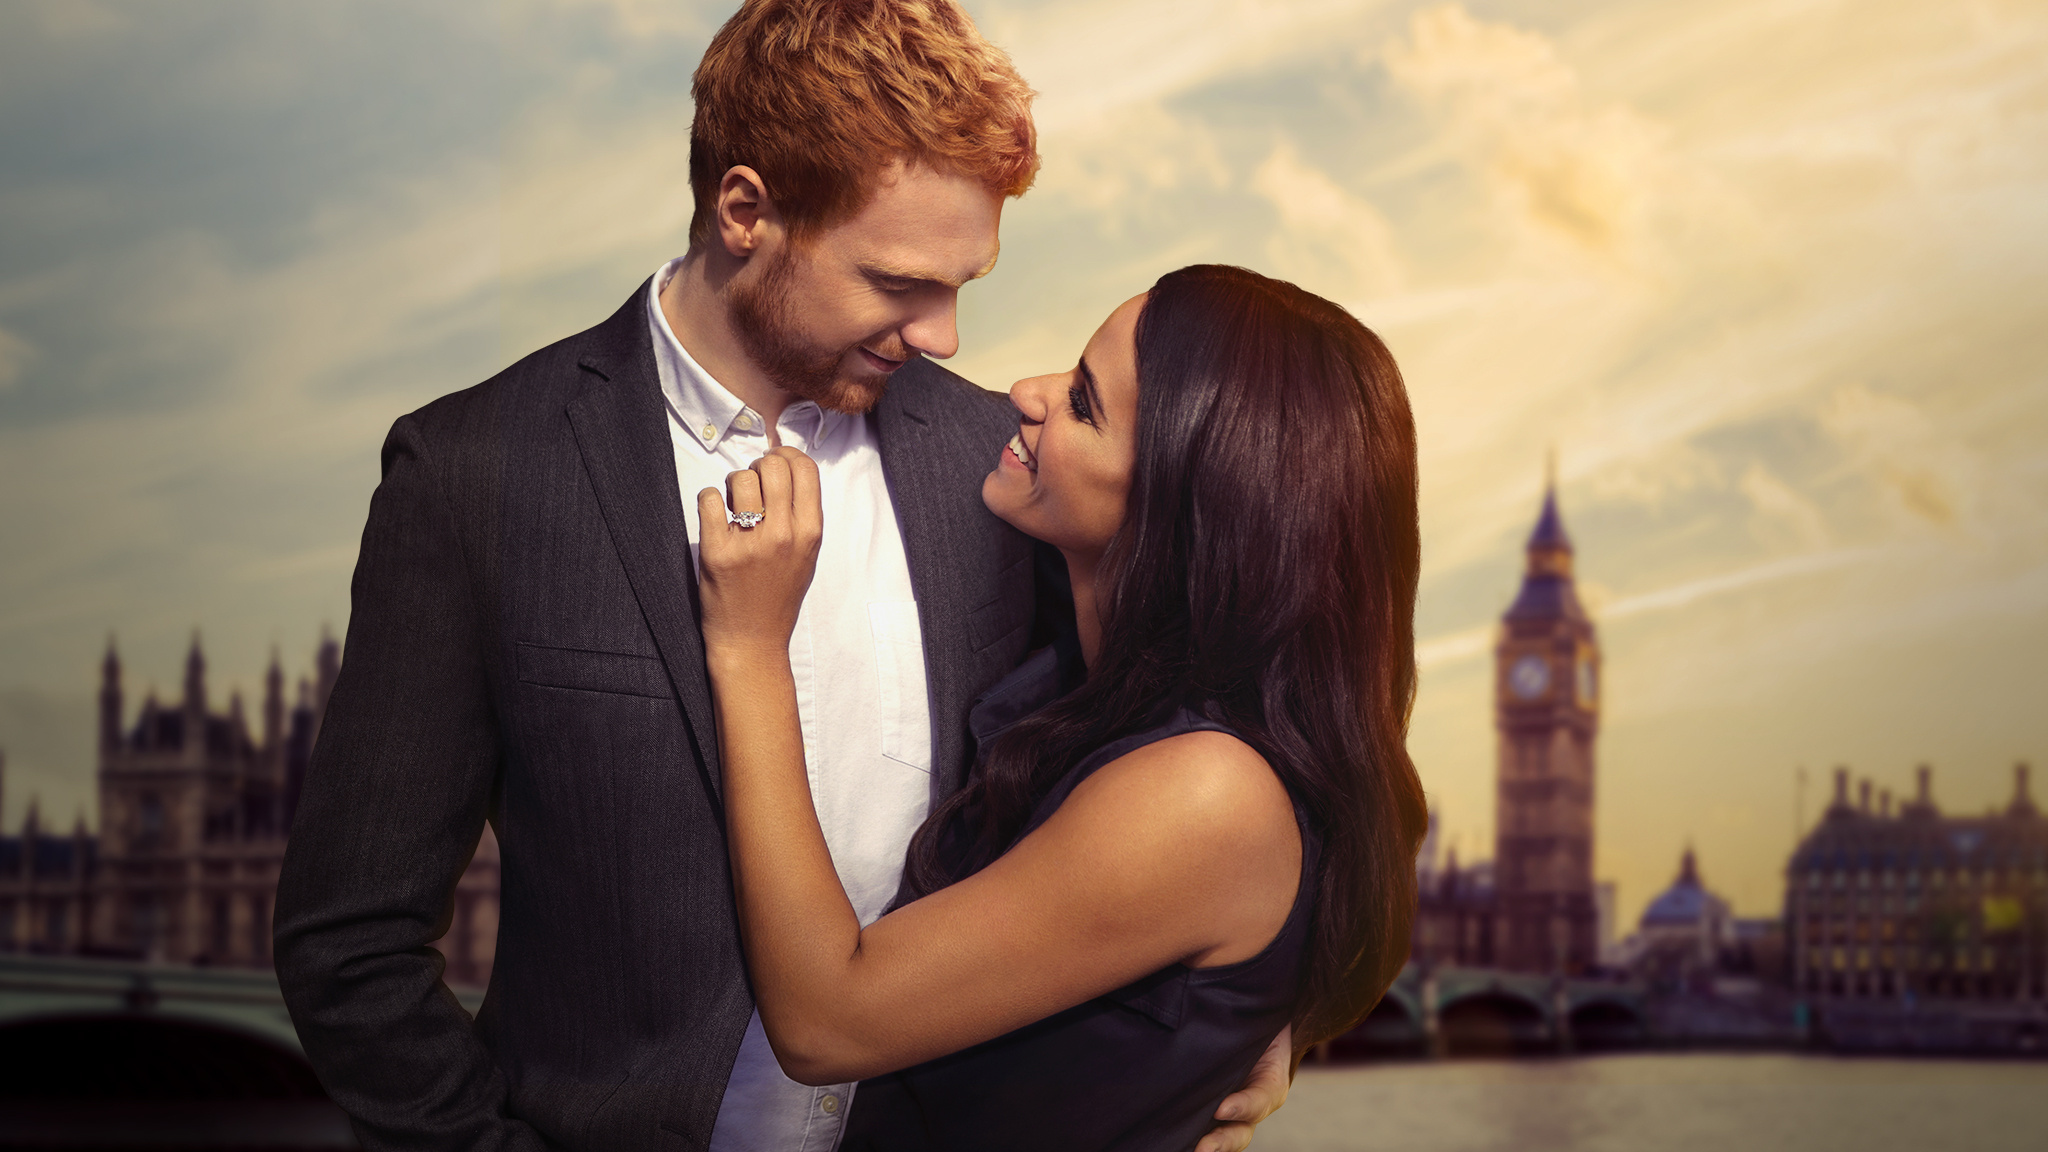 Meghan Markle and Harry, Becoming royal documentary, Lifetime channel, Celebrity love story, 2050x1160 HD Desktop